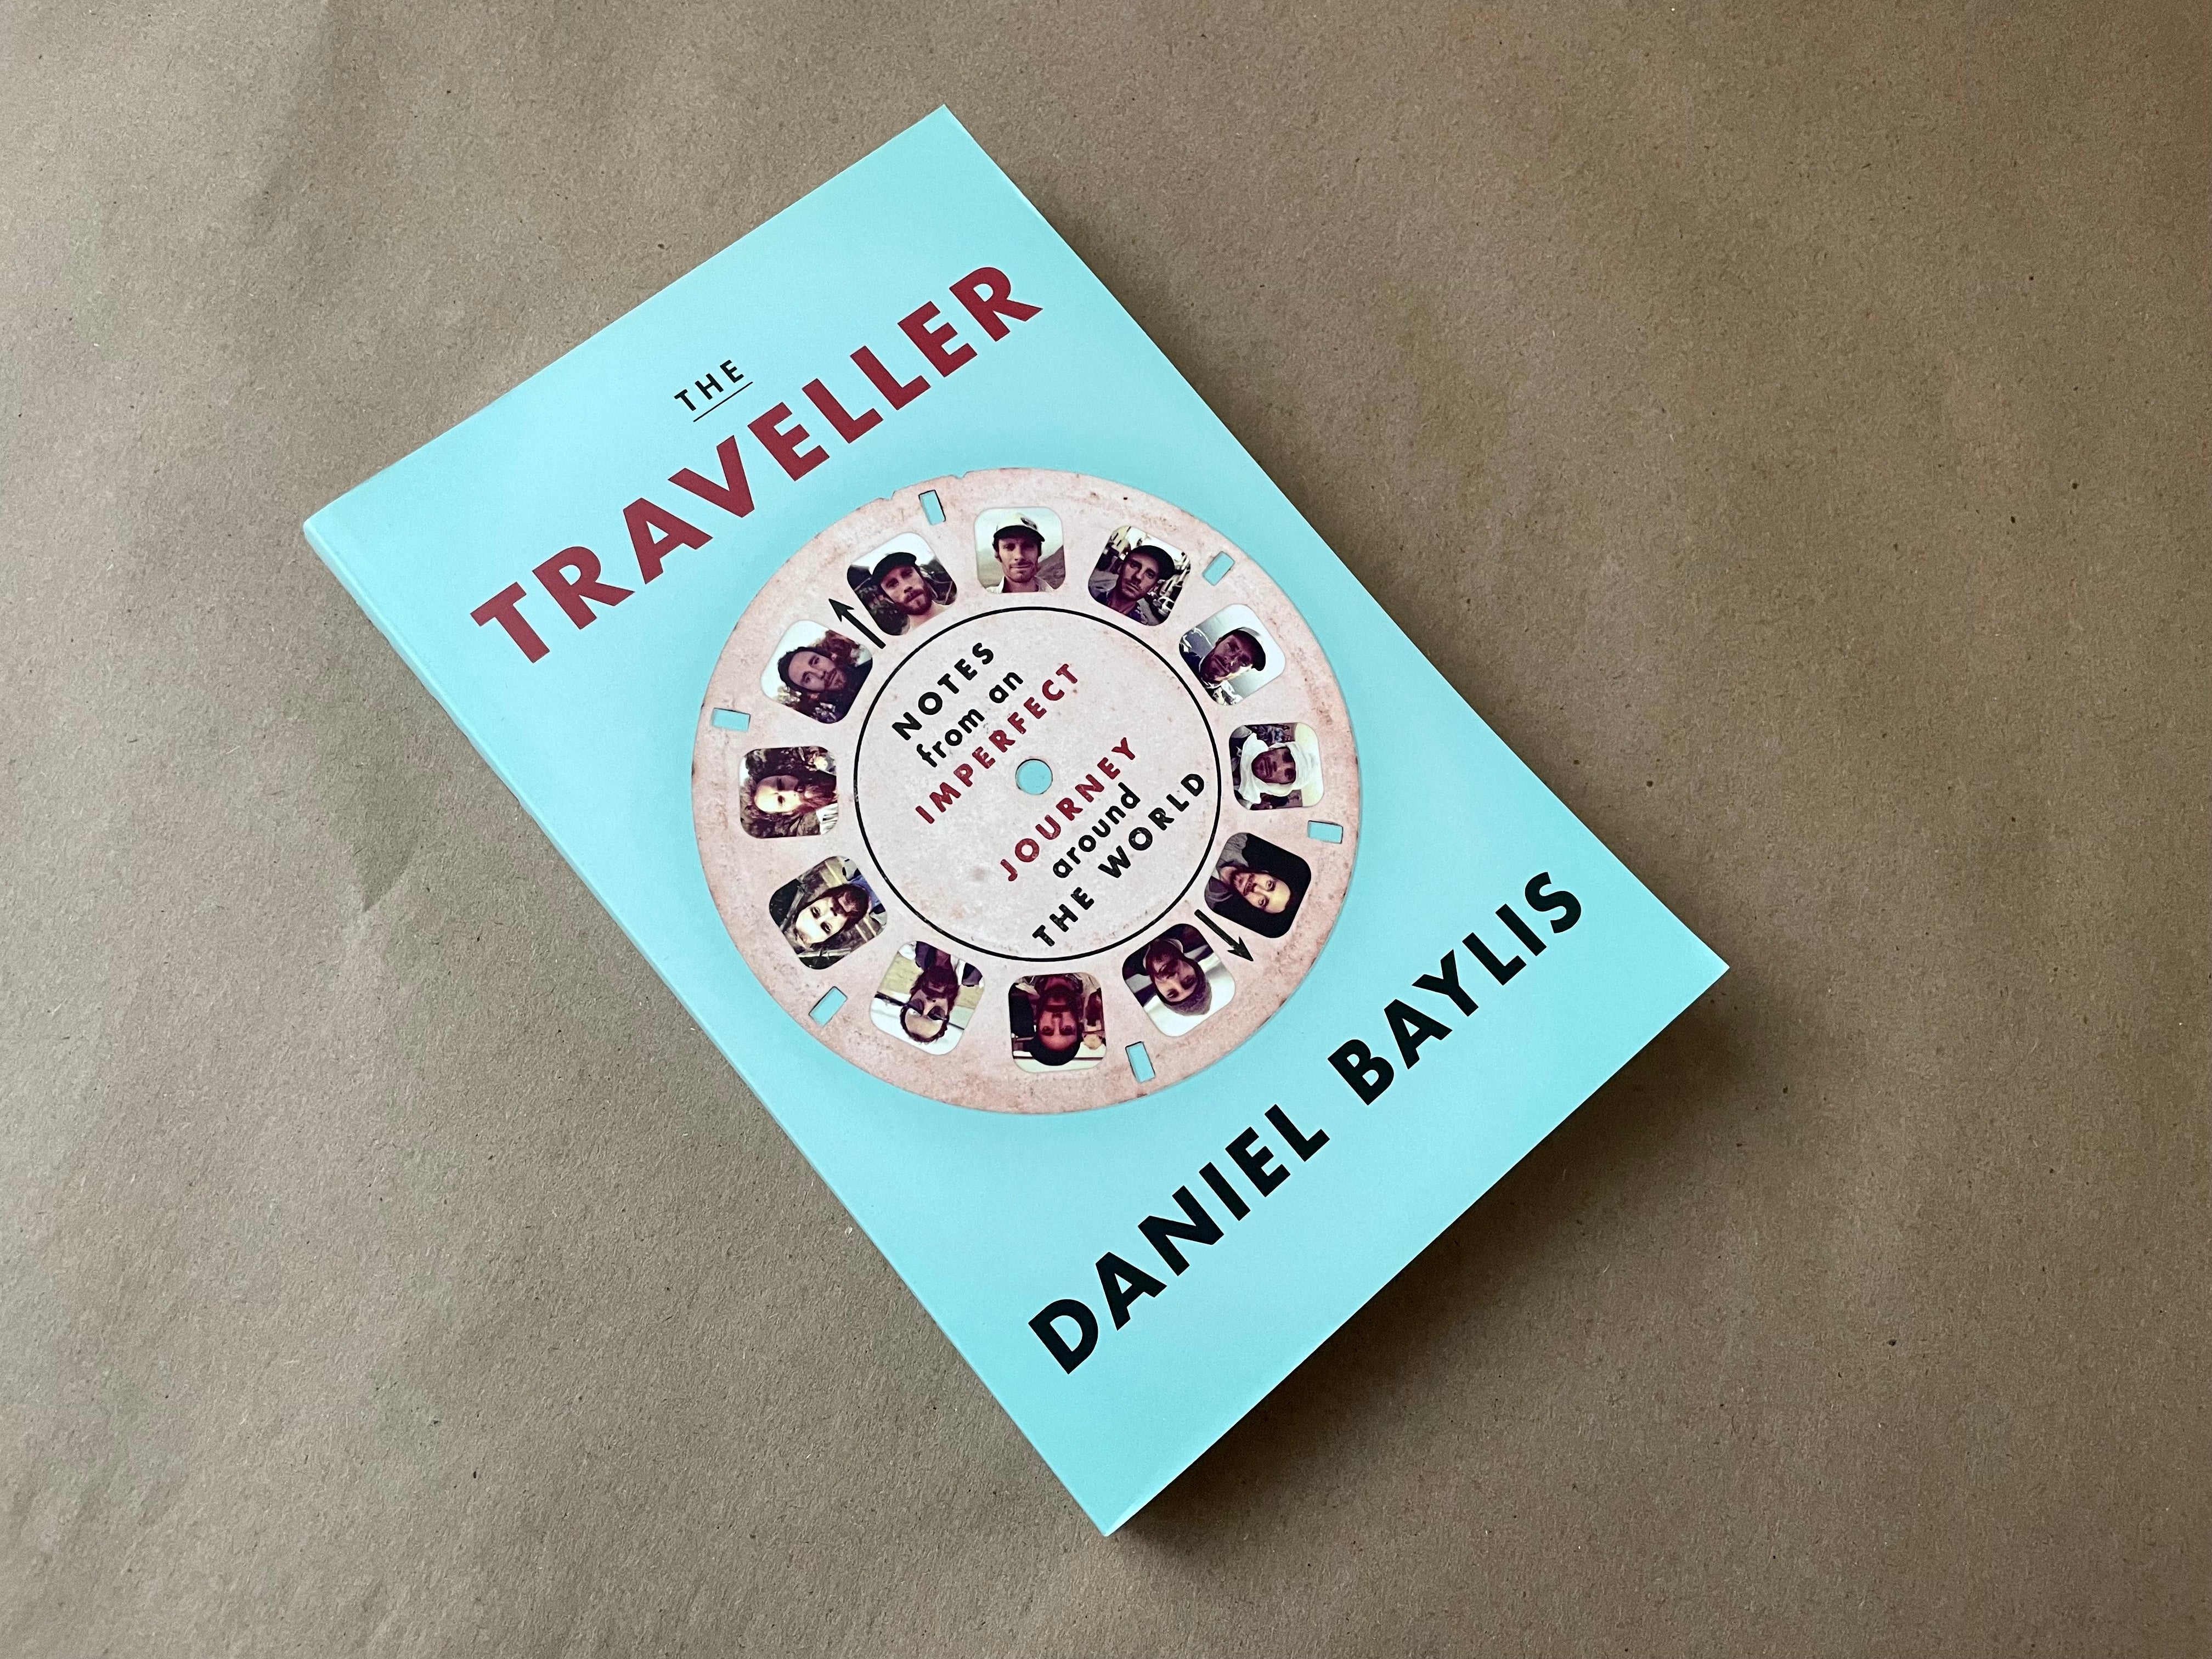 The Traveller: Notes from an Imperfect Journey Around the World